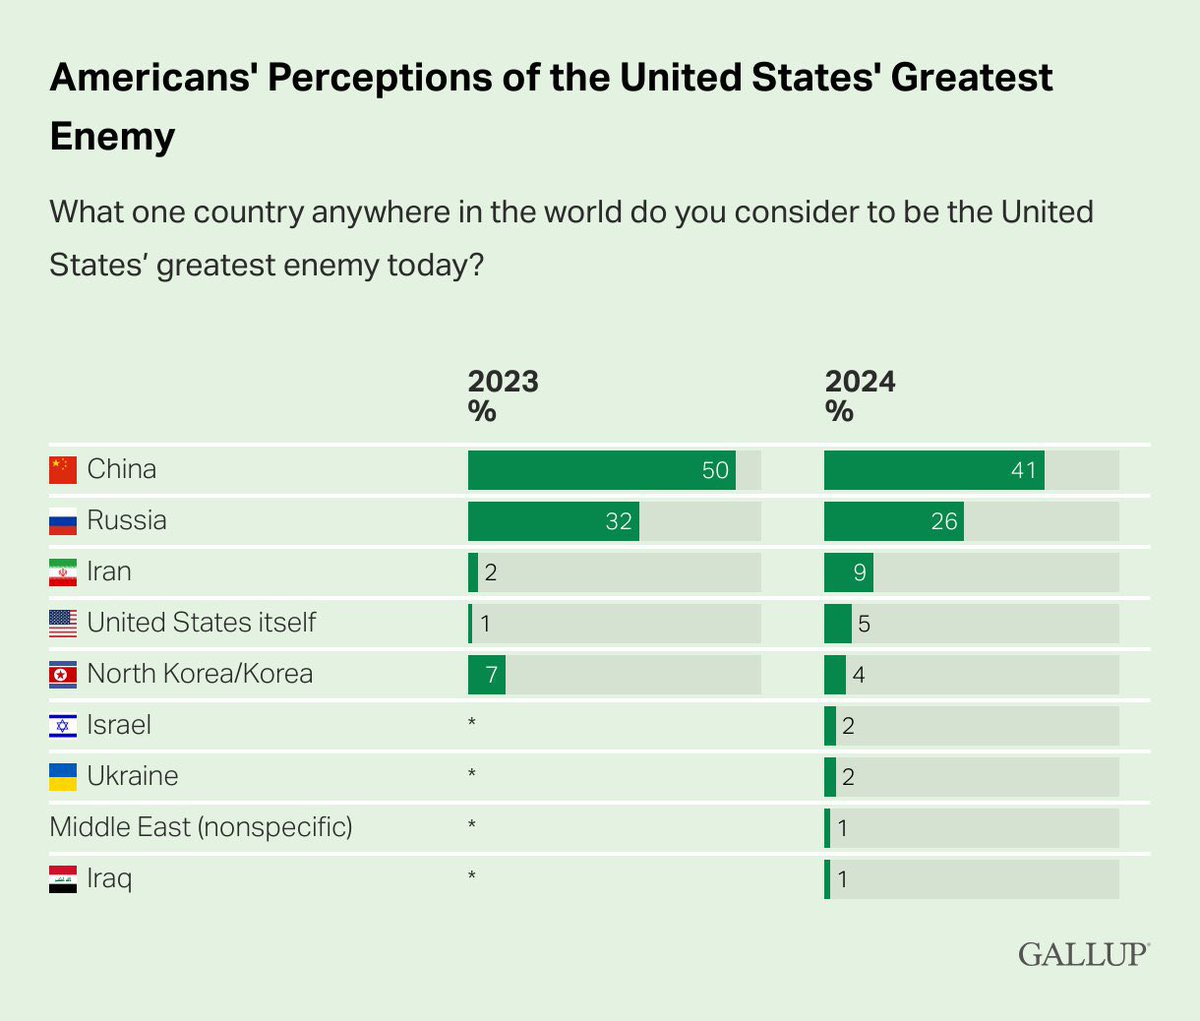 Despite a decline this year, China is still viewed as the US’s greatest enemy